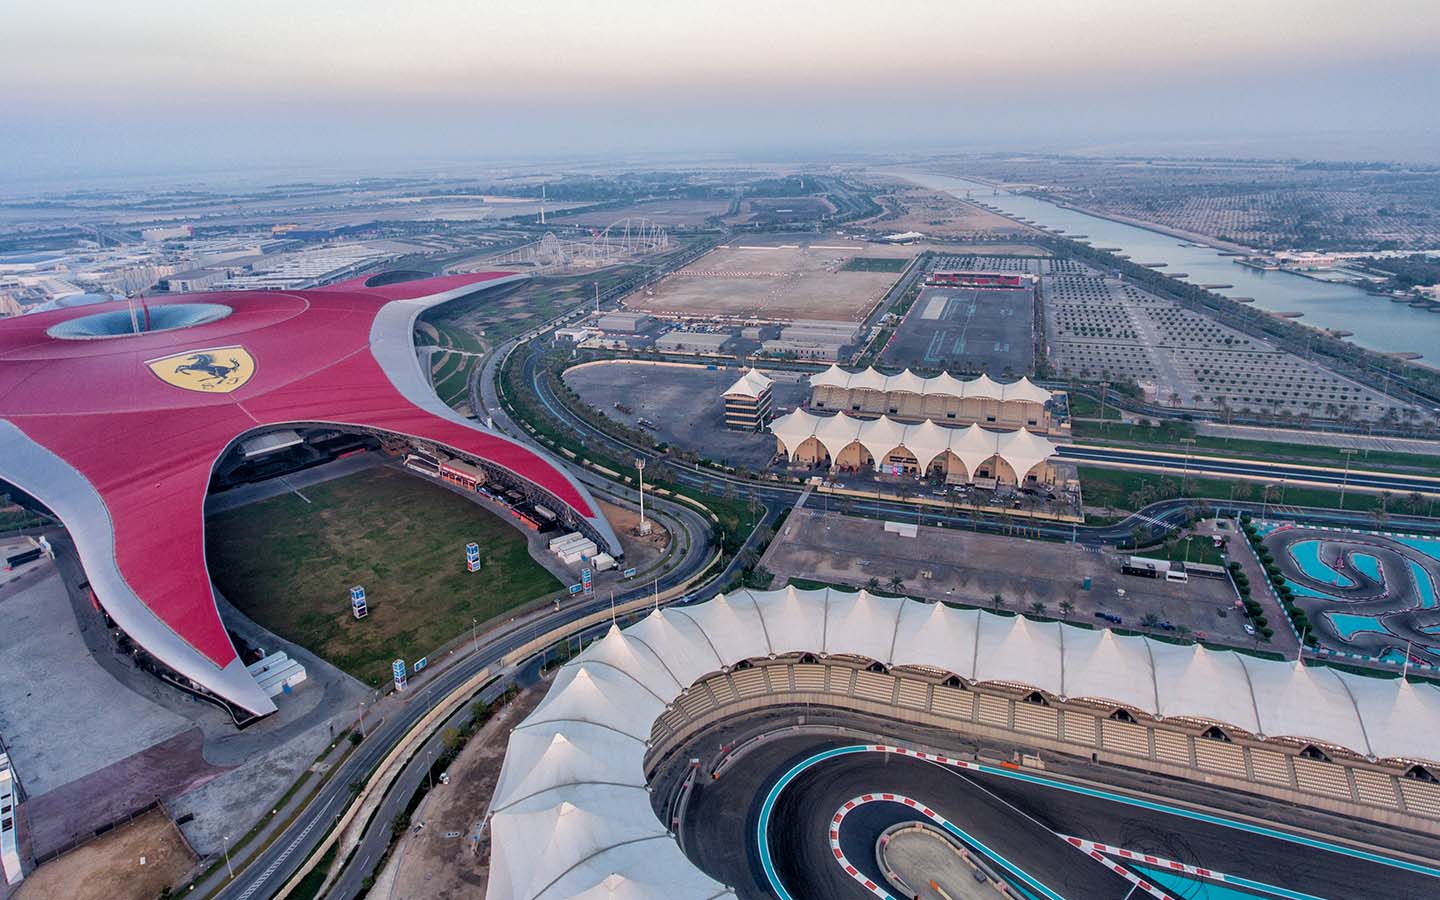 the route includes popular destinations of yas island